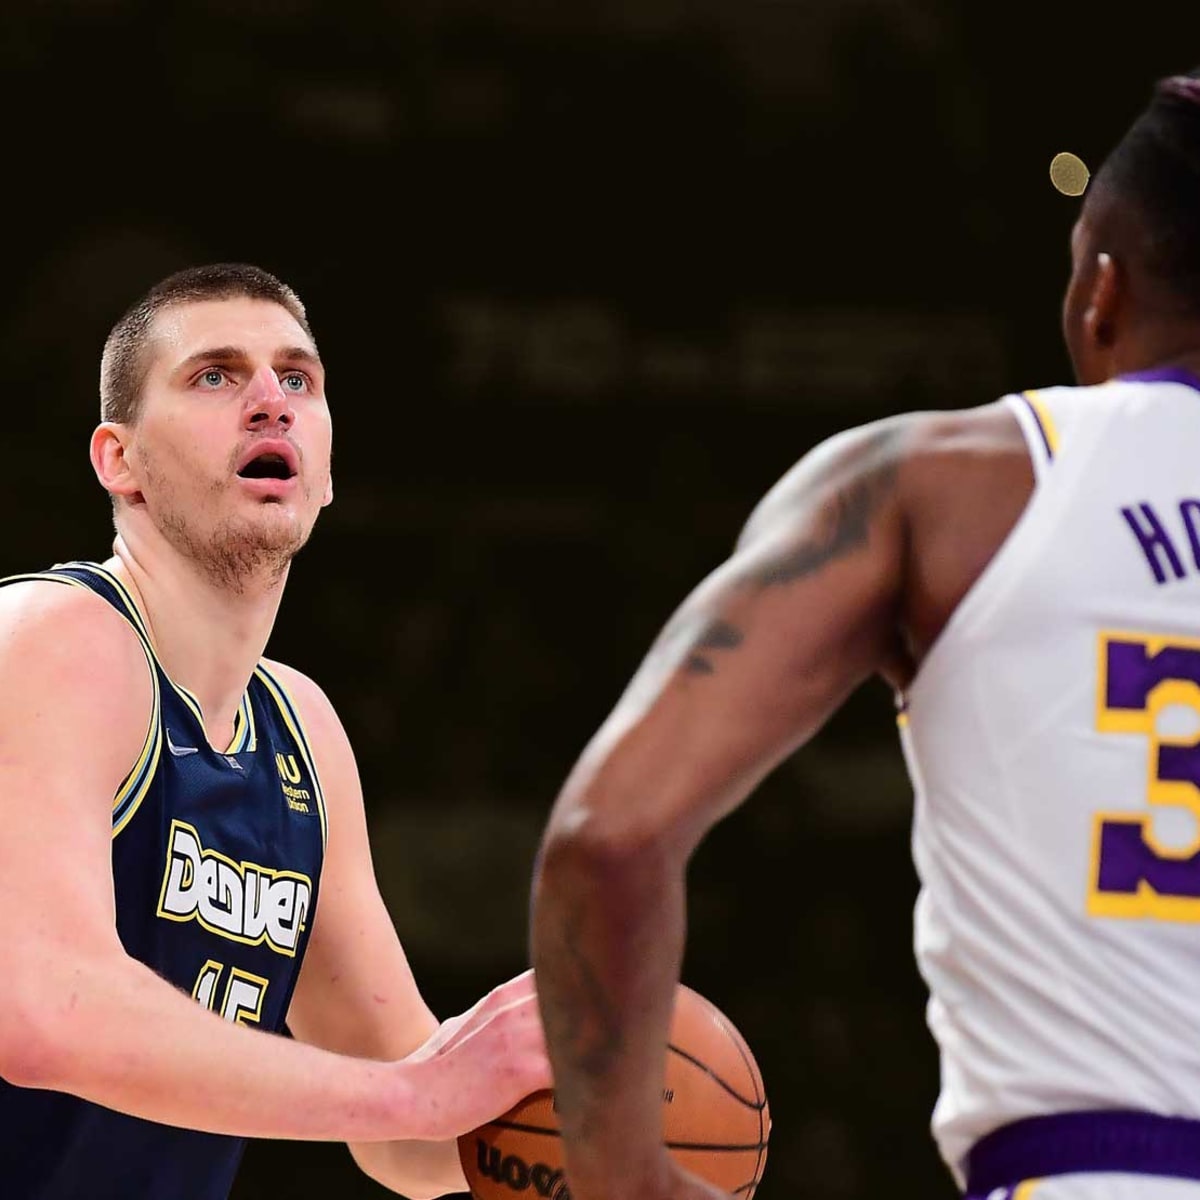 Are you taking prime Dwight Howard over prime Jokic?